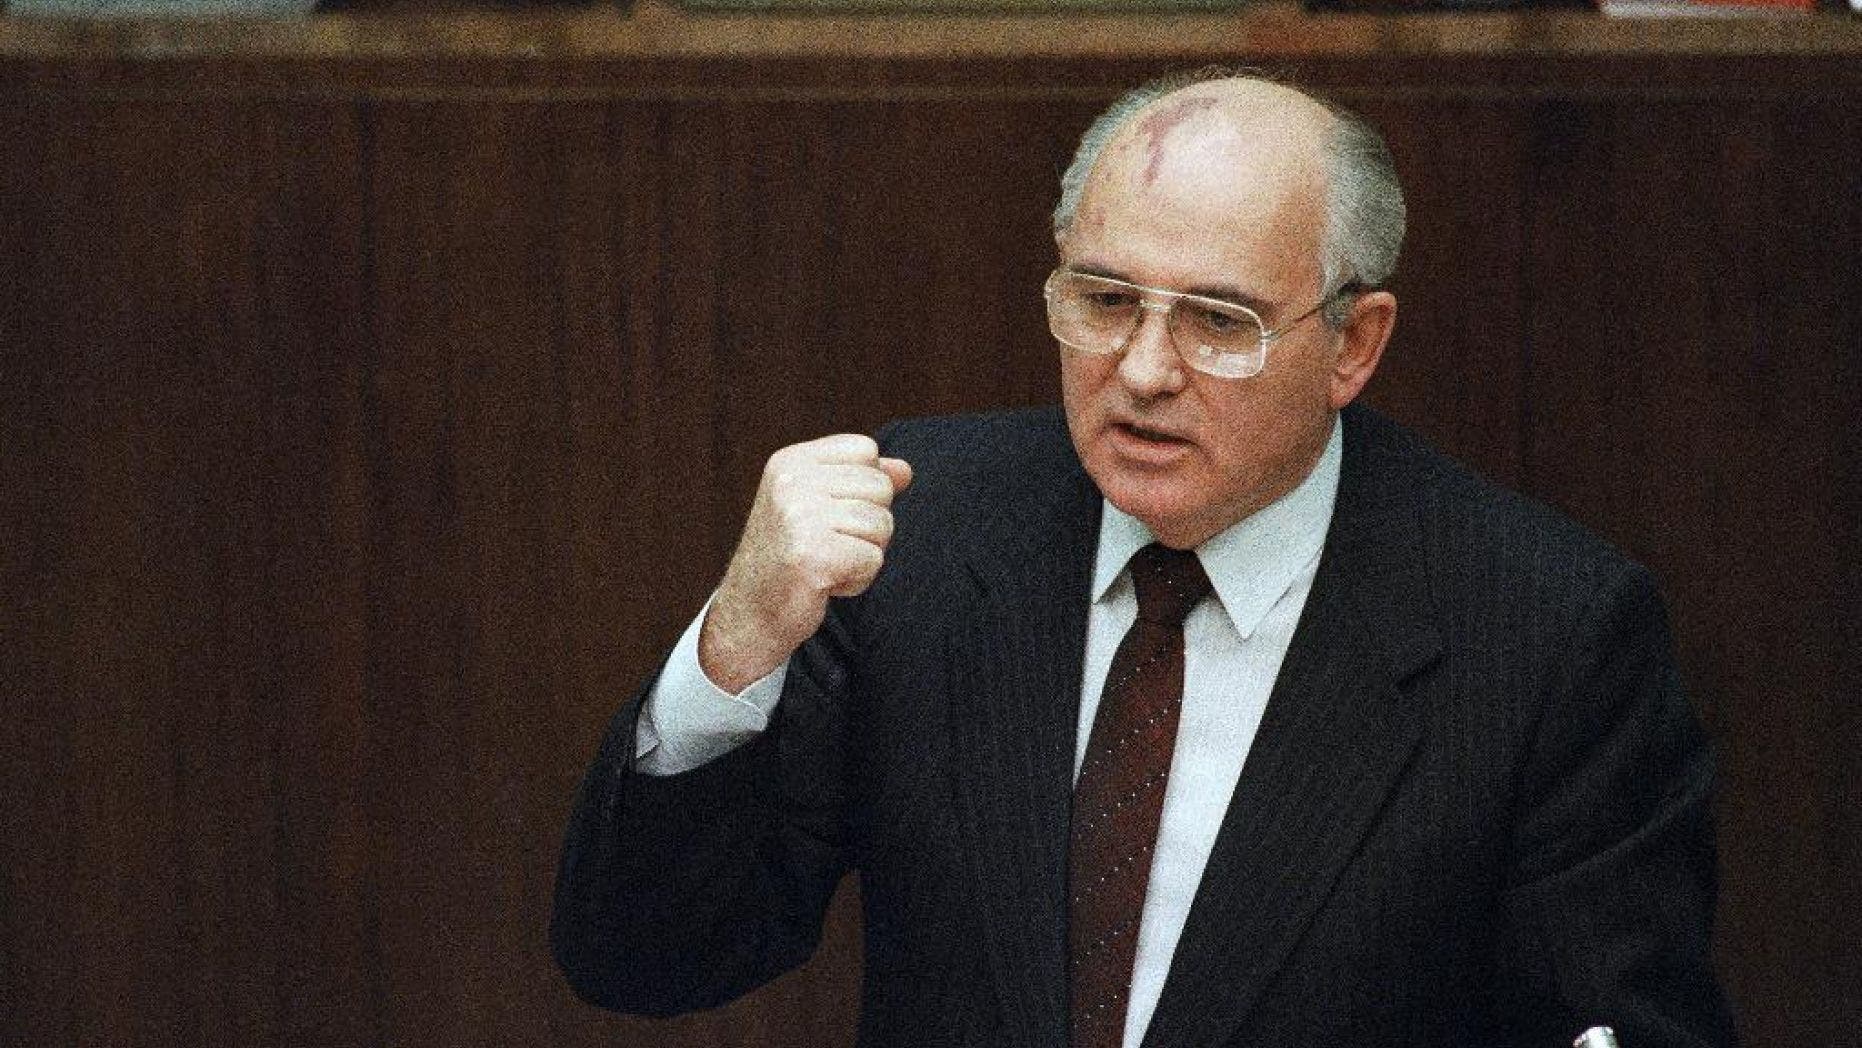 Gorbachev's interpreter reacts to Russia-Ukraine crisis, escalations in tension since Cold War's end